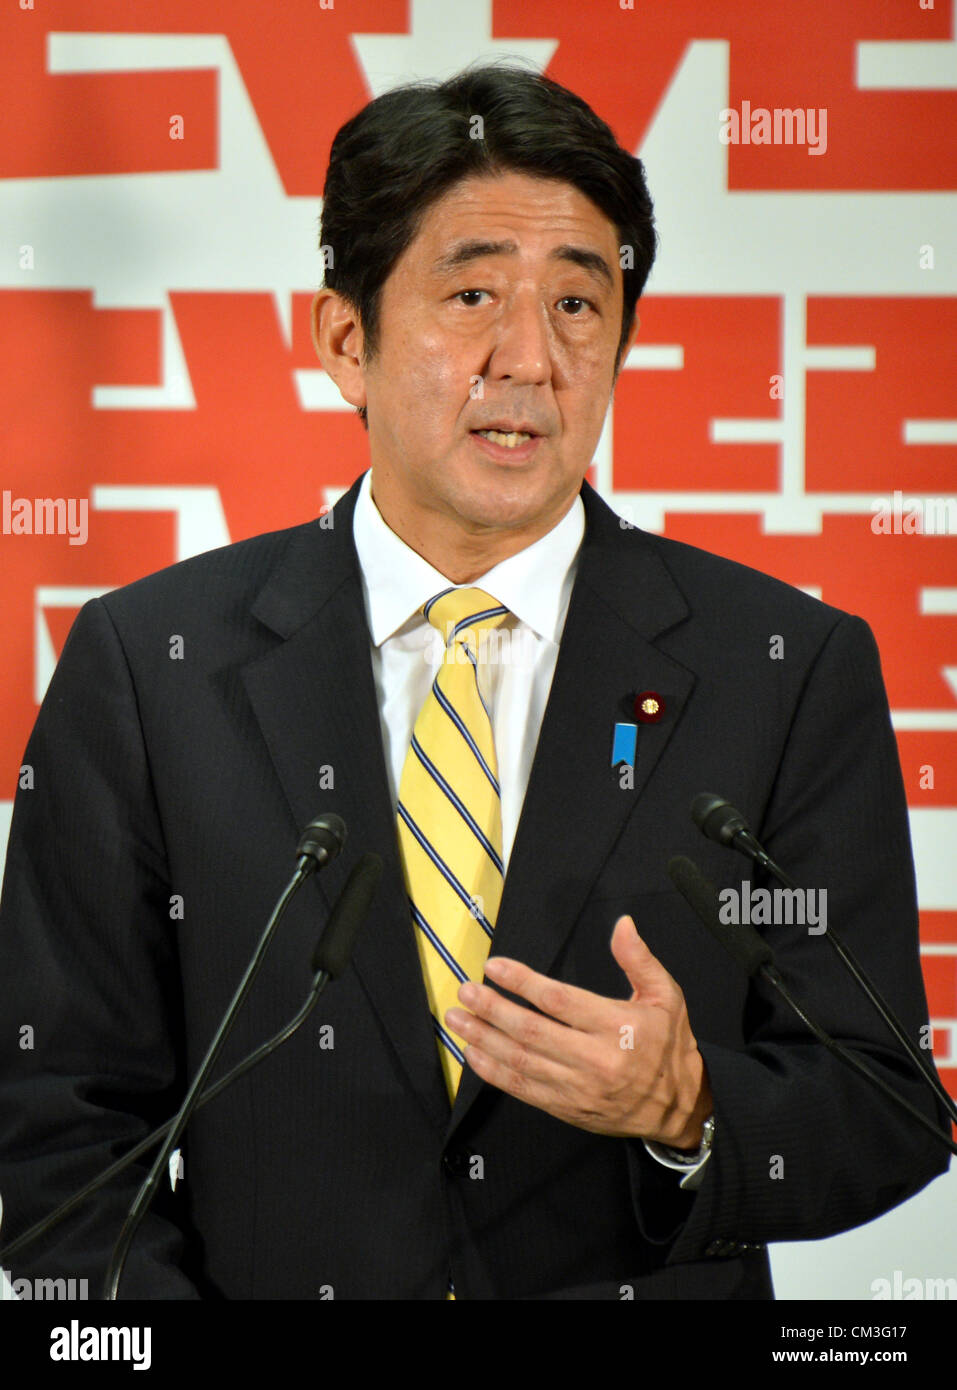 September 26, 2012, Tokyo, Japan - Japan's former Prime Minister Shinzo Abe speaks during an inaugural news conference at the Liberal Democratic Party headquarters in Tokyo following his reelection as the LDP president on Wednesday, September 26, 2012. Abe has become the first LDP chief to make a comeback to the top post since the party was founded in 1955. Abe could also become Japan's prime minister for the second time , should the LDP oust the Democratic Party of Japan from power in the next general election to be held within a year. Abe became prime minister in September 2006 but quit the  Stock Photo